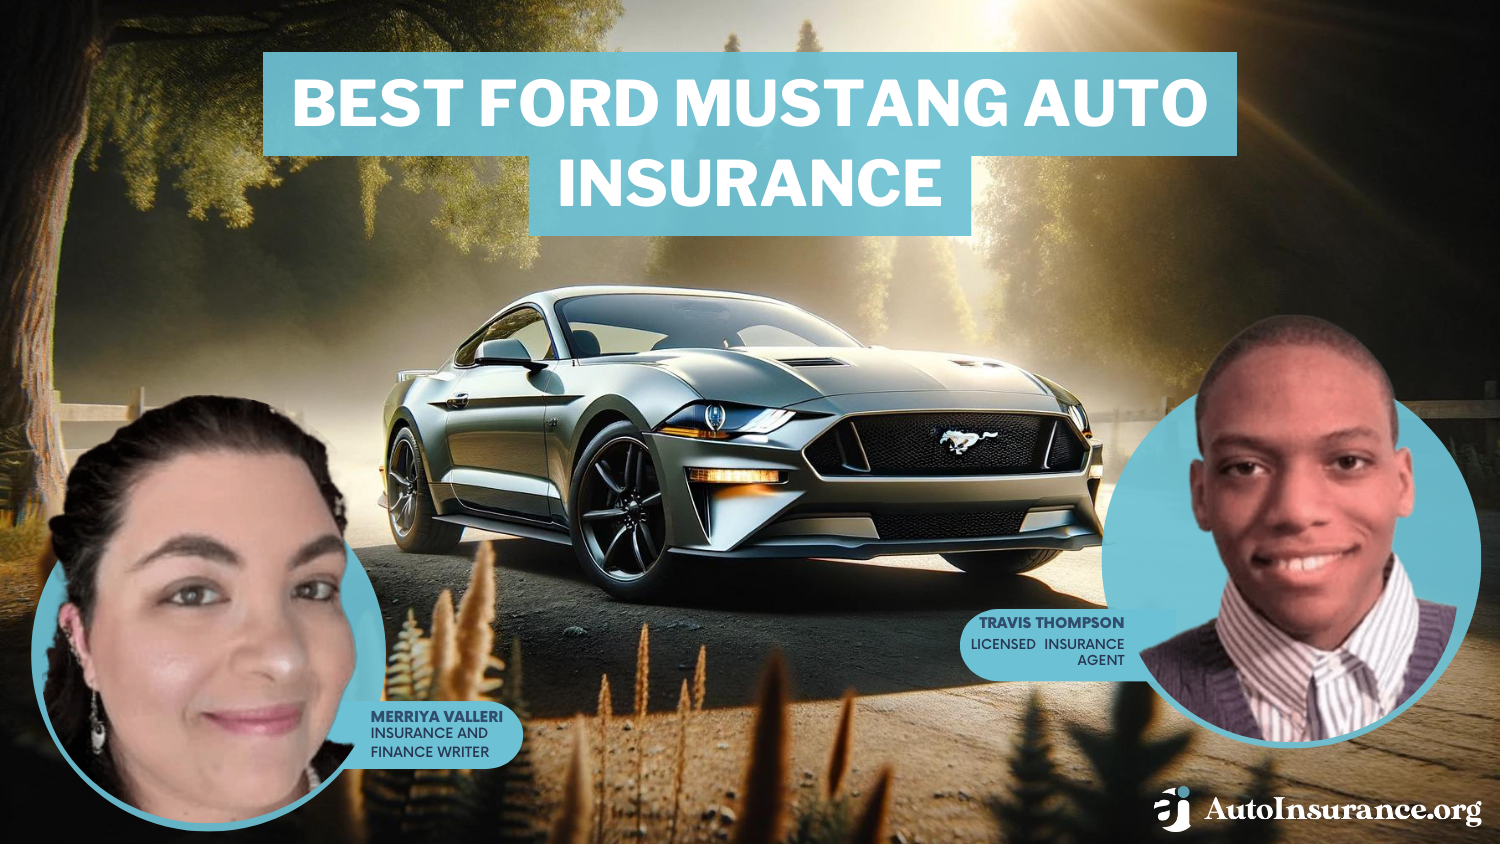 Best Ford Mustang Auto Insurance